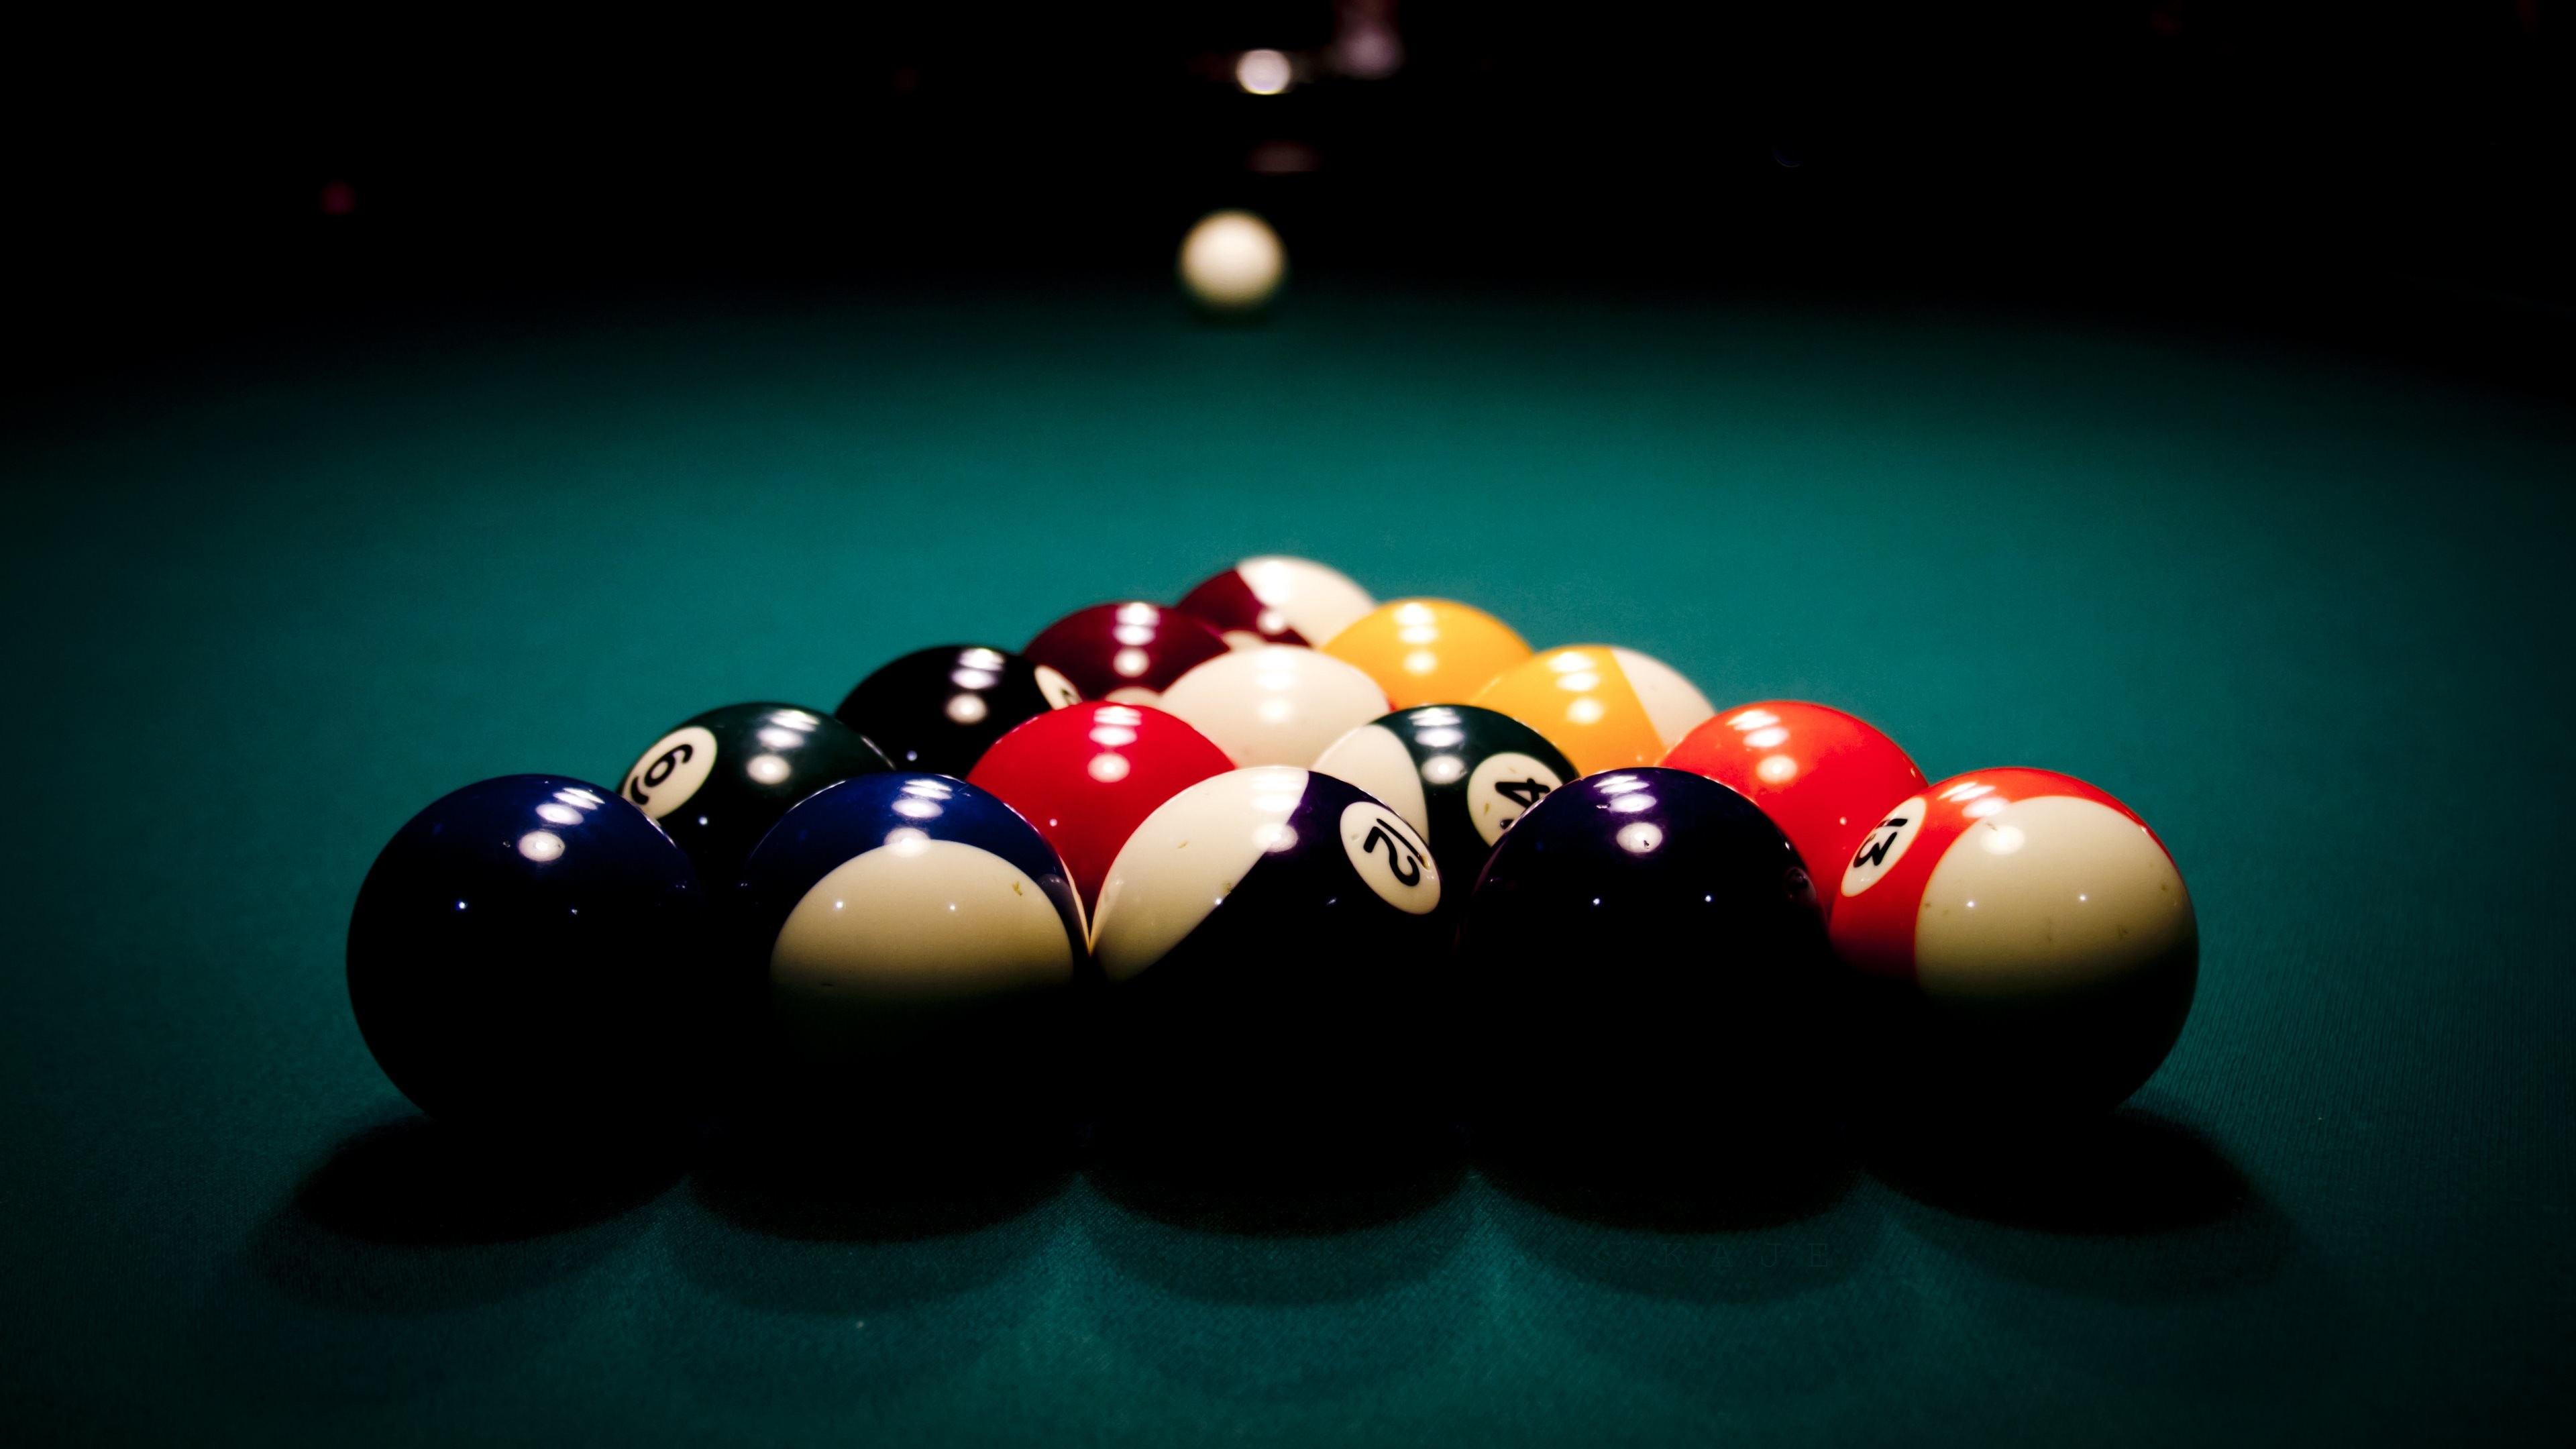 3840x2160 Snooker Wallpapers Find best latest Snooker Wallpapers for your PC desktop  background & mobile phones.